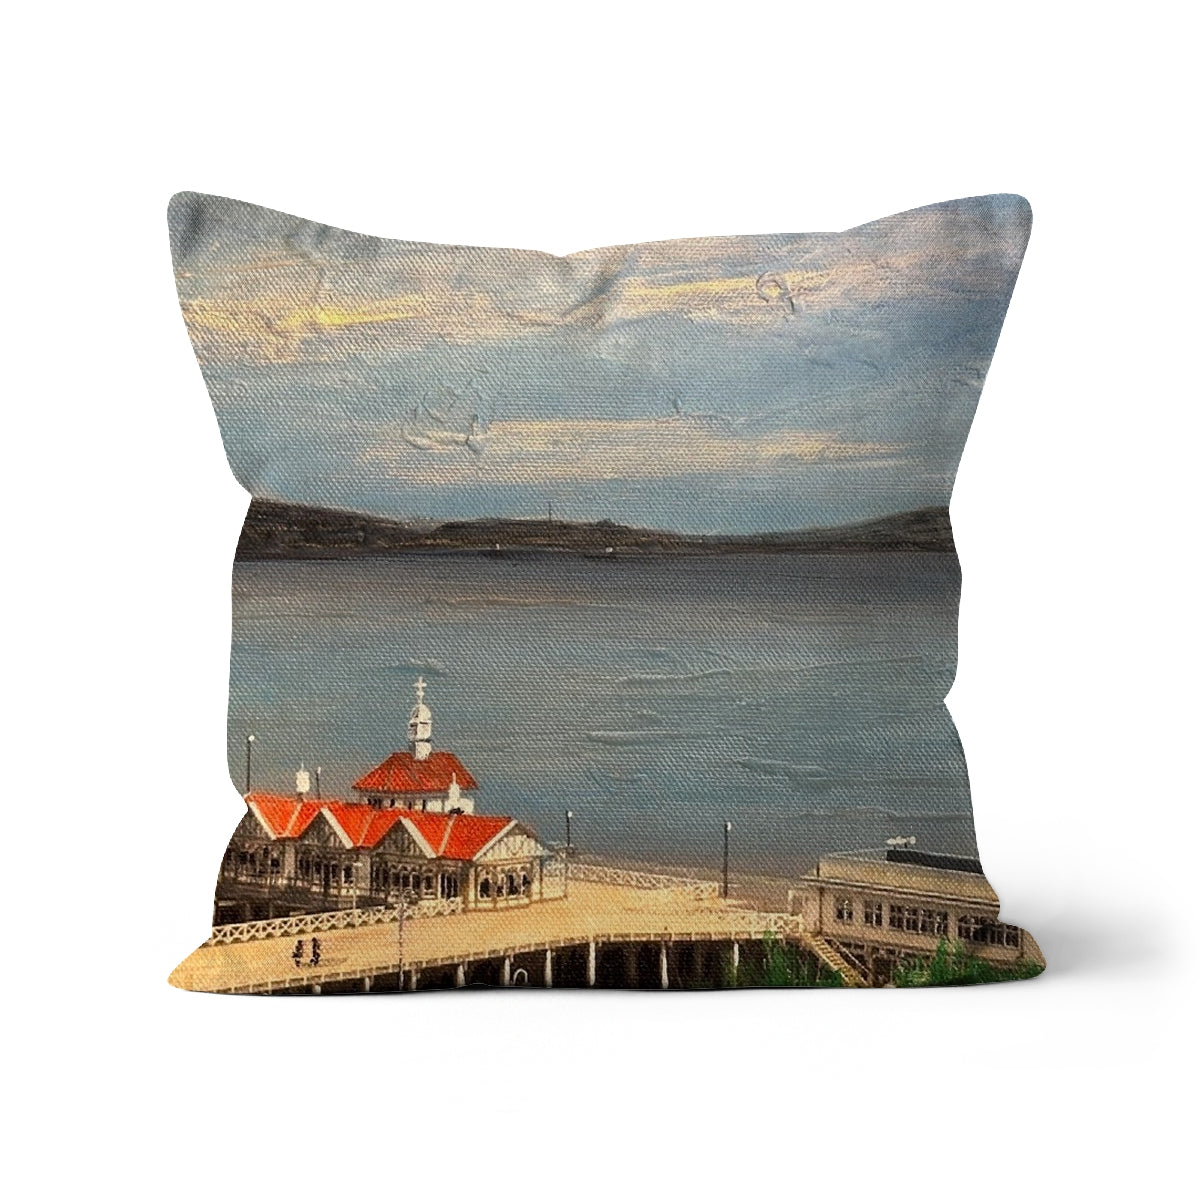 Looking From Dunoon Art Gifts Cushion-Cushions-River Clyde Art Gallery-Linen-22"x22"-Paintings, Prints, Homeware, Art Gifts From Scotland By Scottish Artist Kevin Hunter